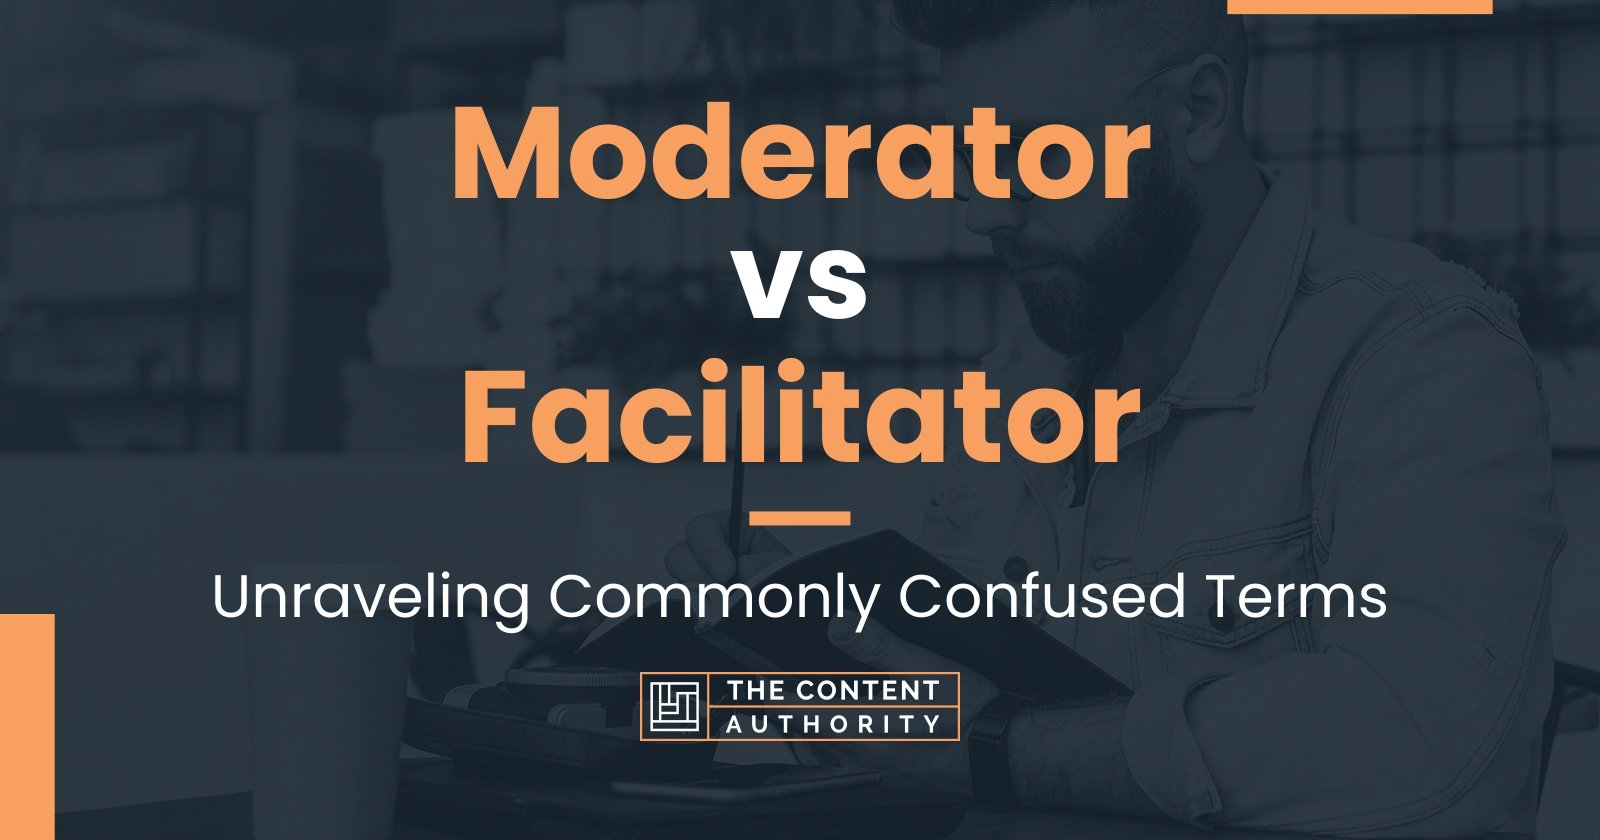 Moderator vs Facilitator: Unraveling Commonly Confused Terms